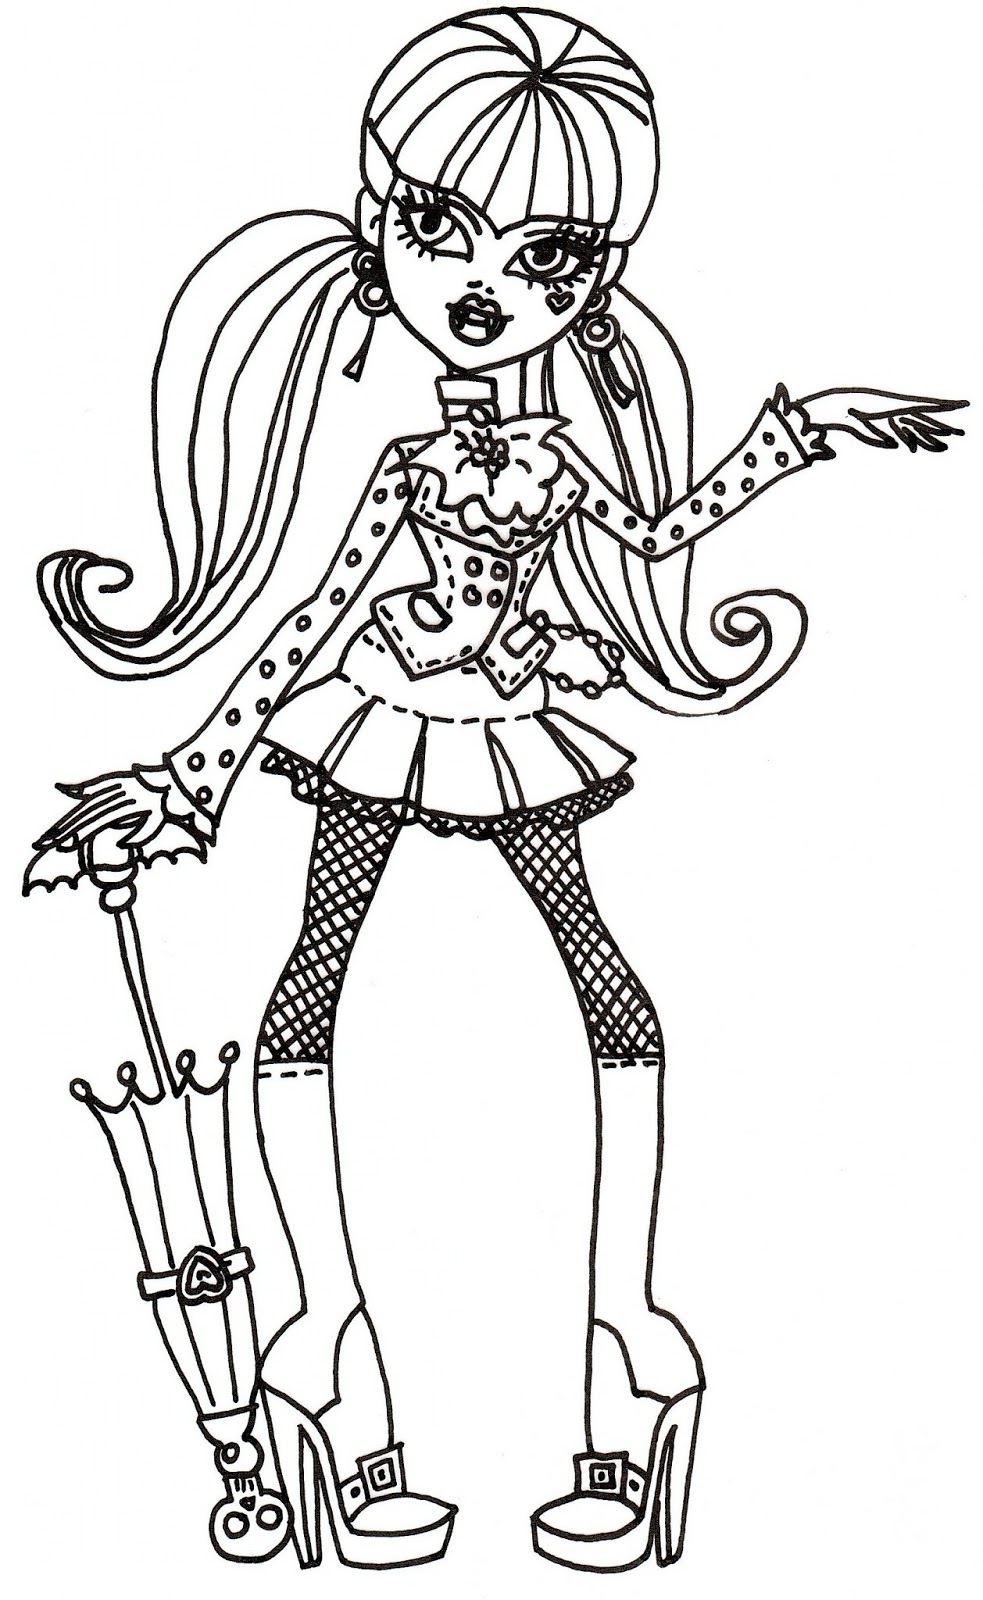 Free Printable Monster High Coloring Pages: Free Draculaura Coloring Sheet